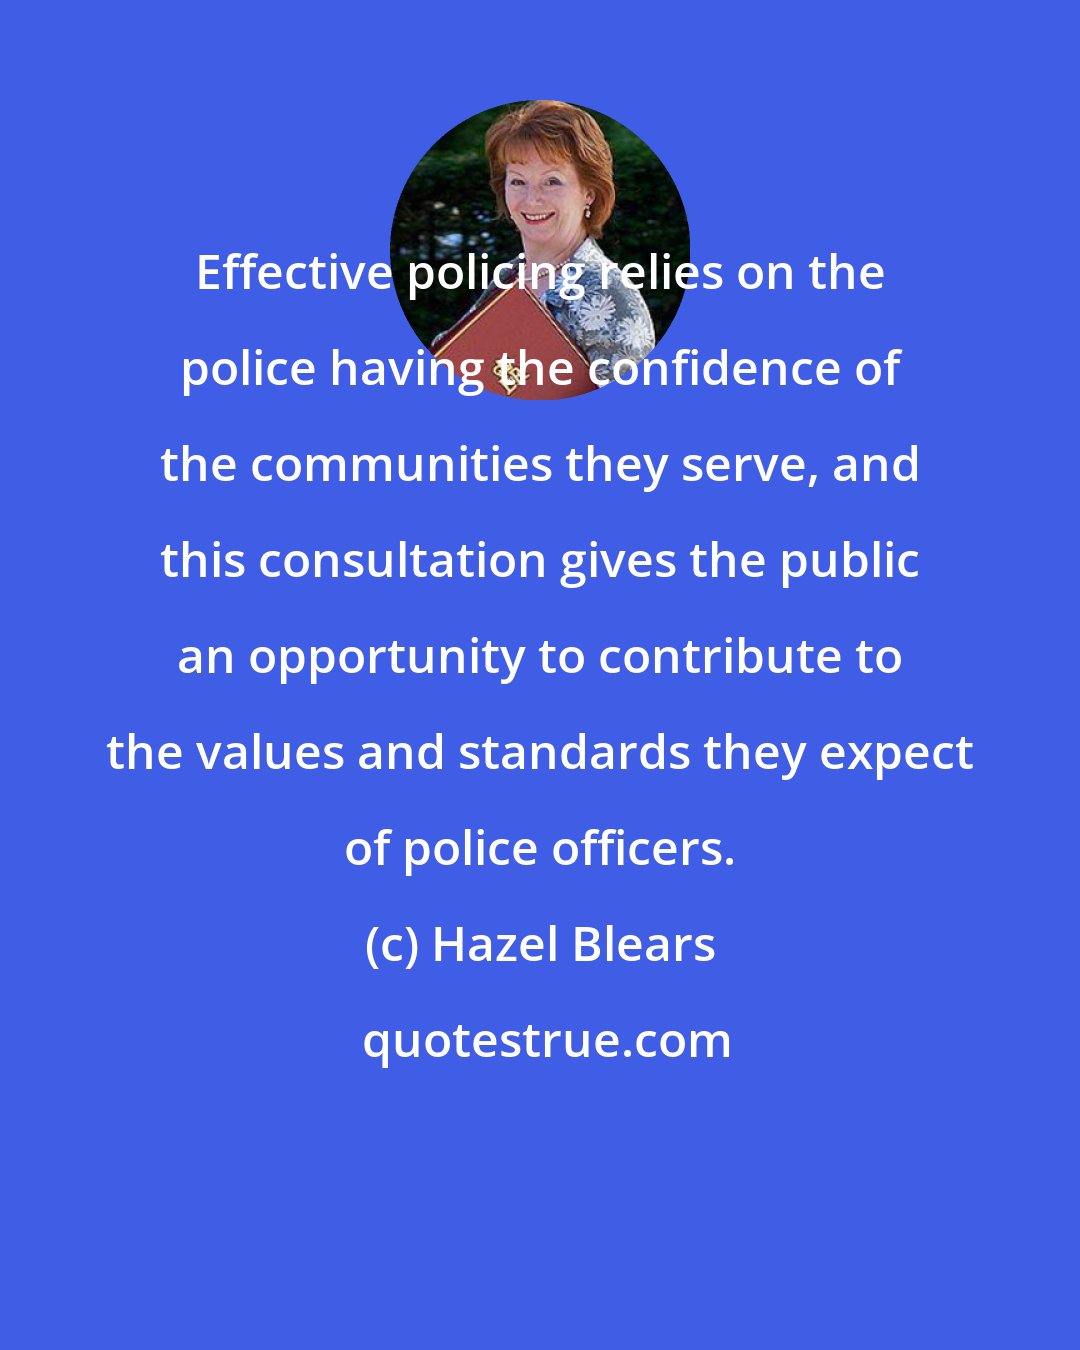 Hazel Blears: Effective policing relies on the police having the confidence of the communities they serve, and this consultation gives the public an opportunity to contribute to the values and standards they expect of police officers.